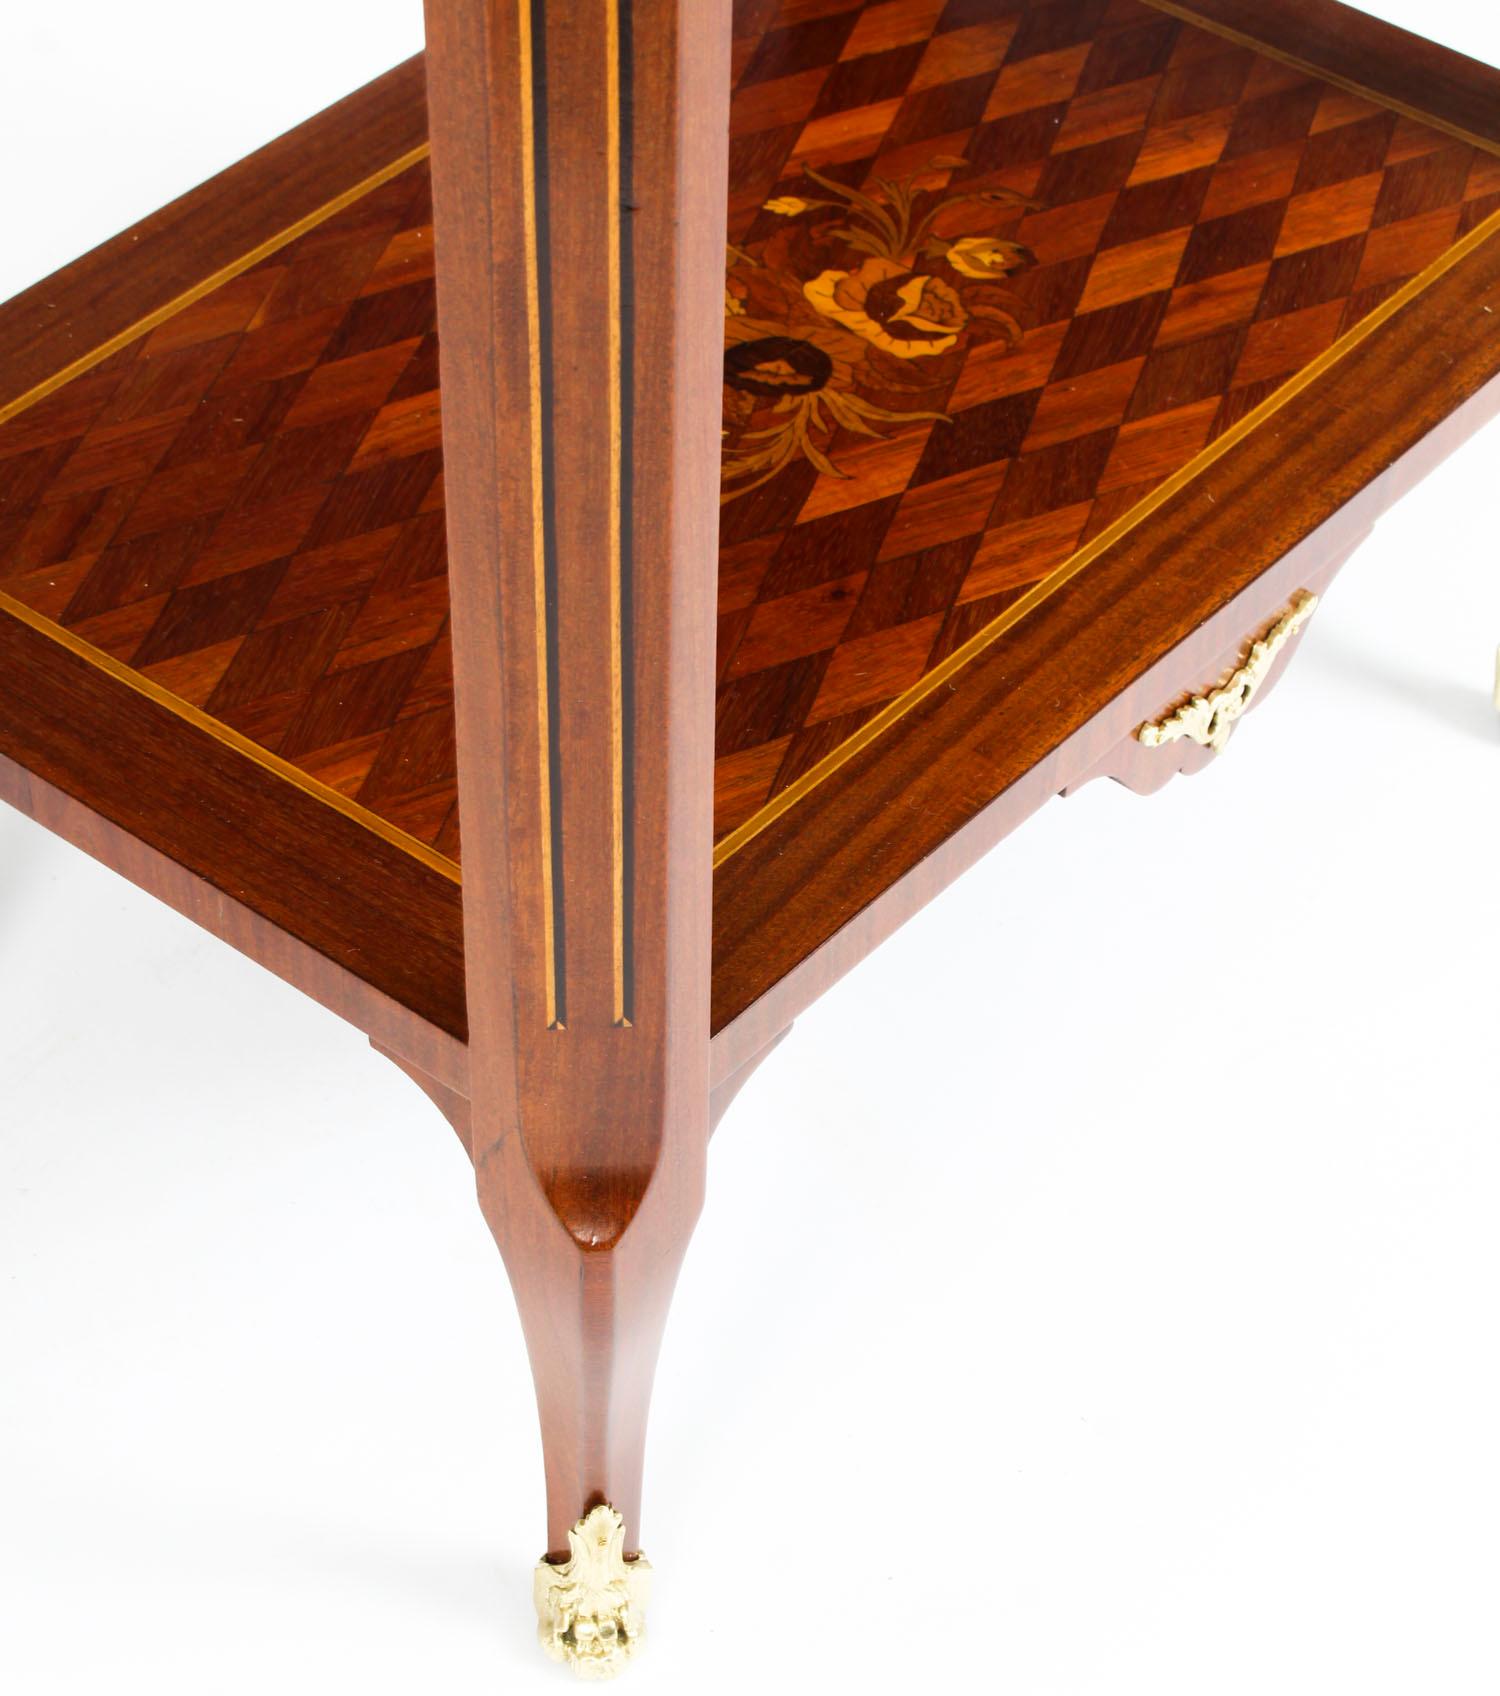 French Parquetry and Marquetry Table En Chiffonière Work Table, 19th Century For Sale 6